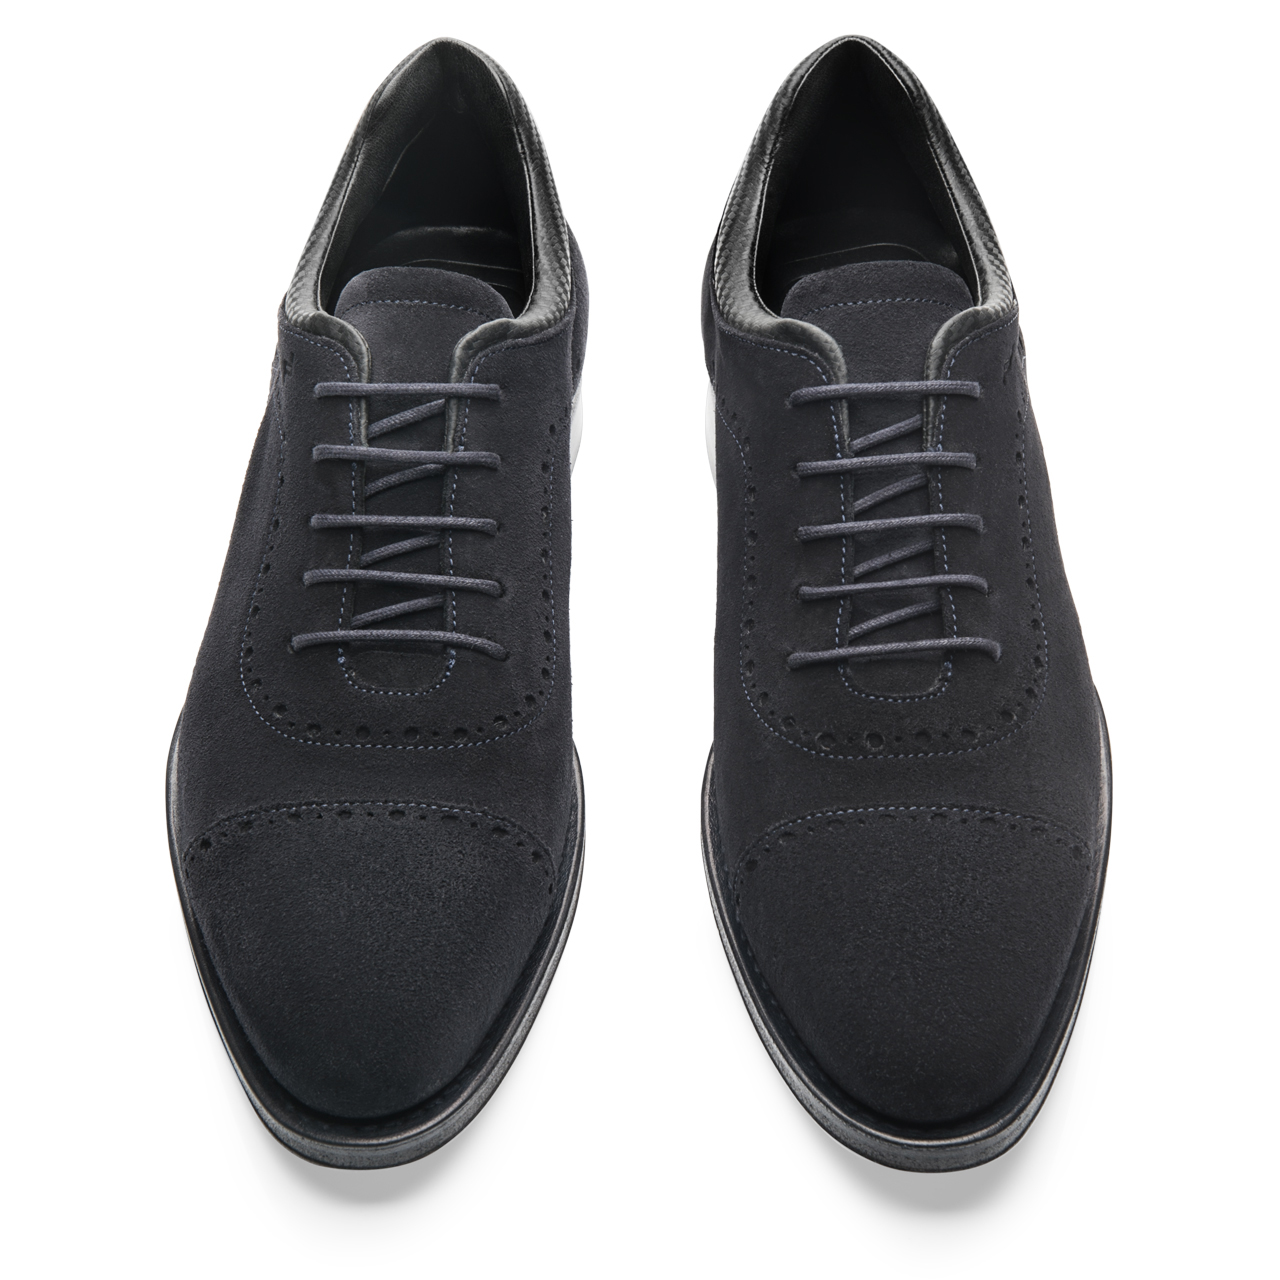 business casual skate shoes